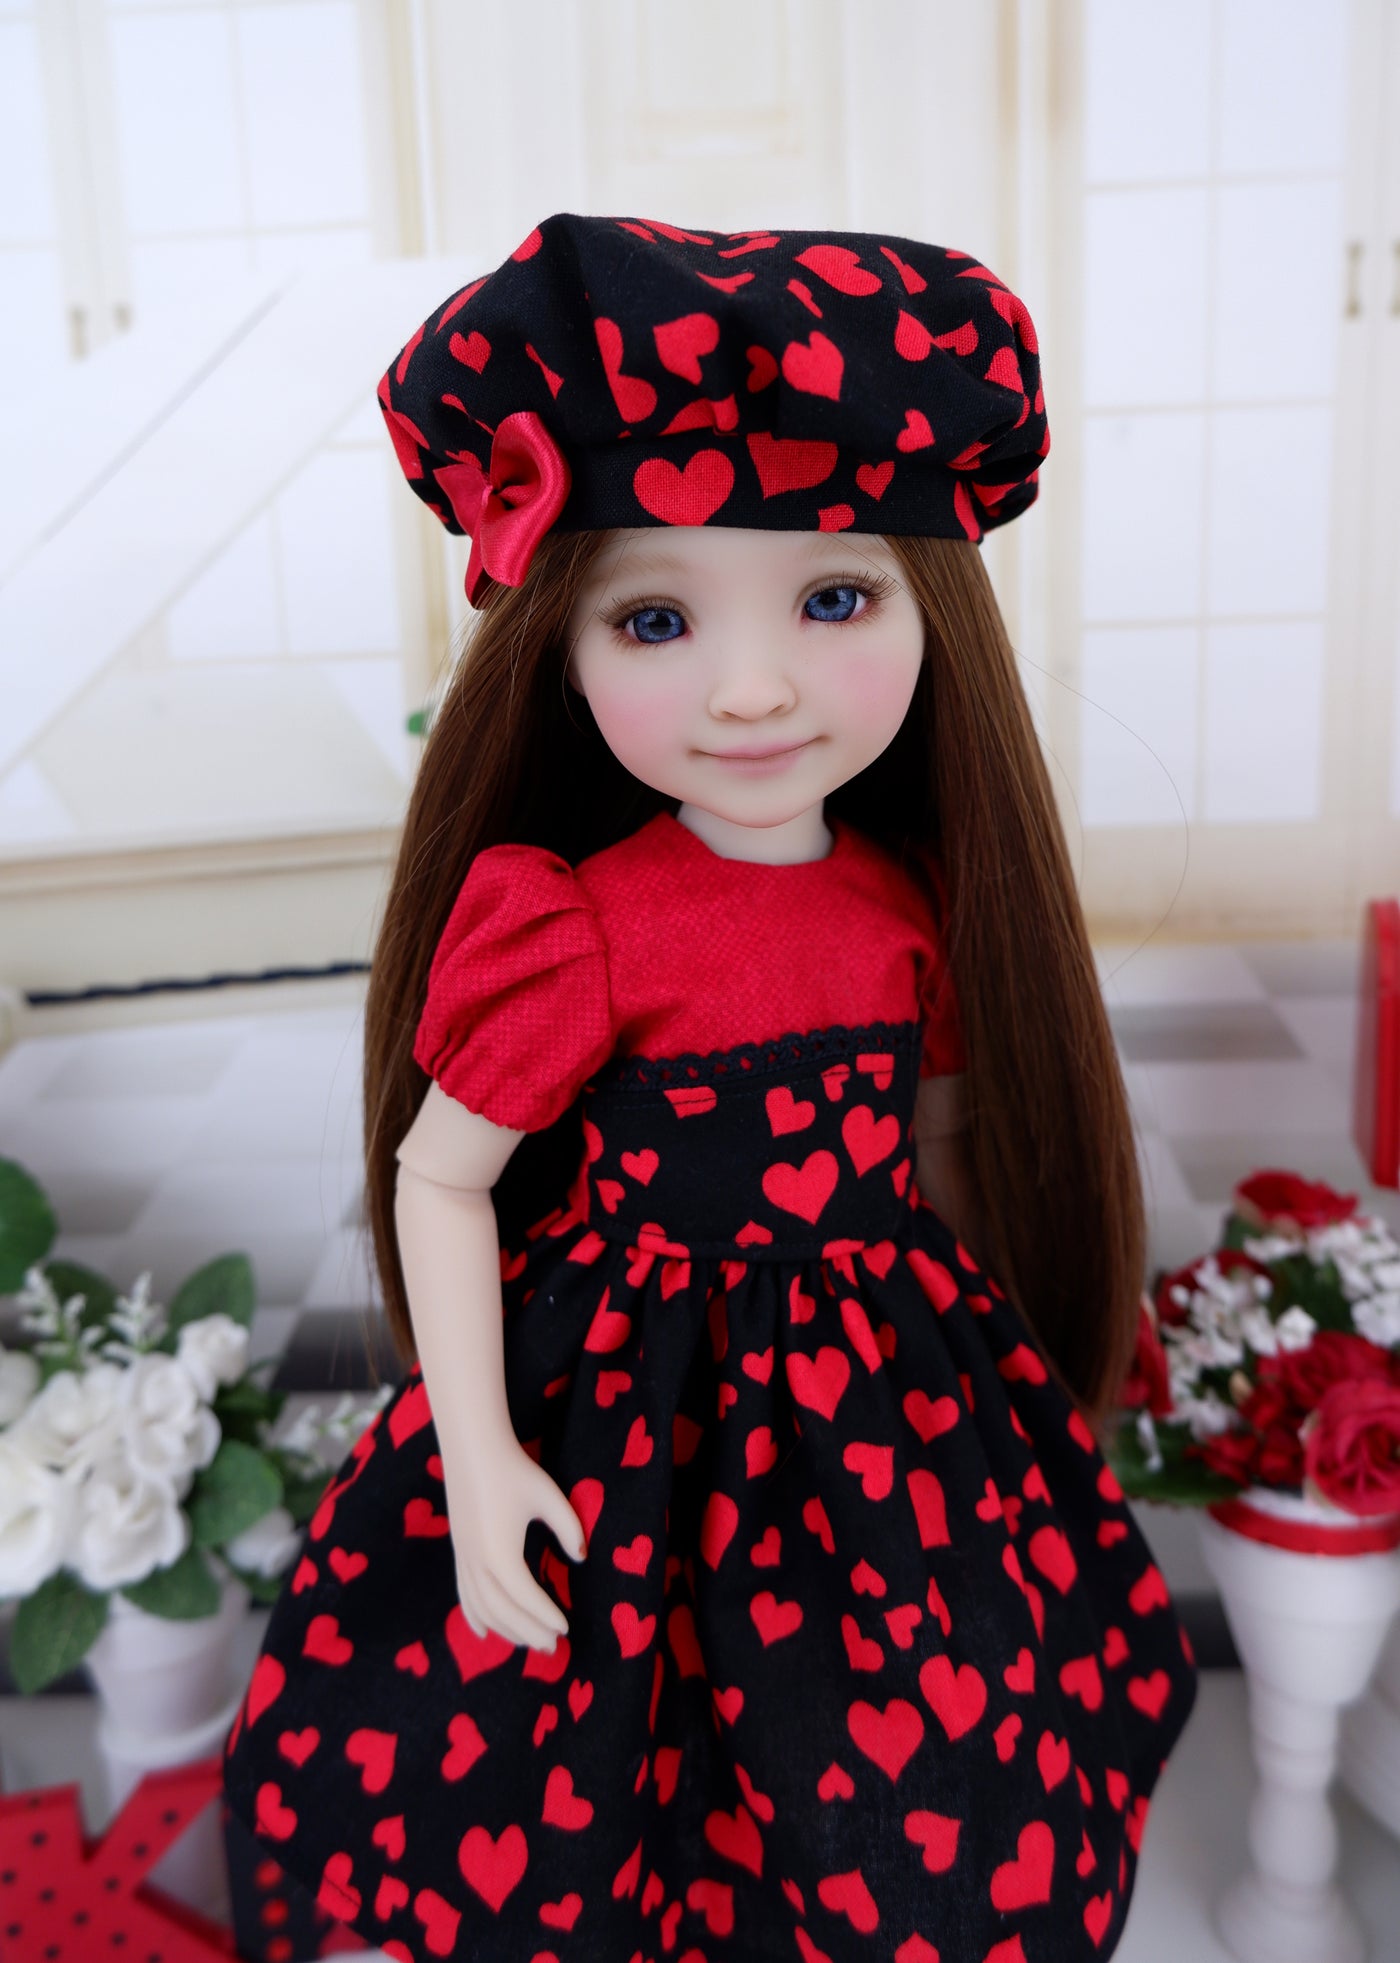 Heartbreaker - dress and shoes for Ruby Red Fashion Friends doll